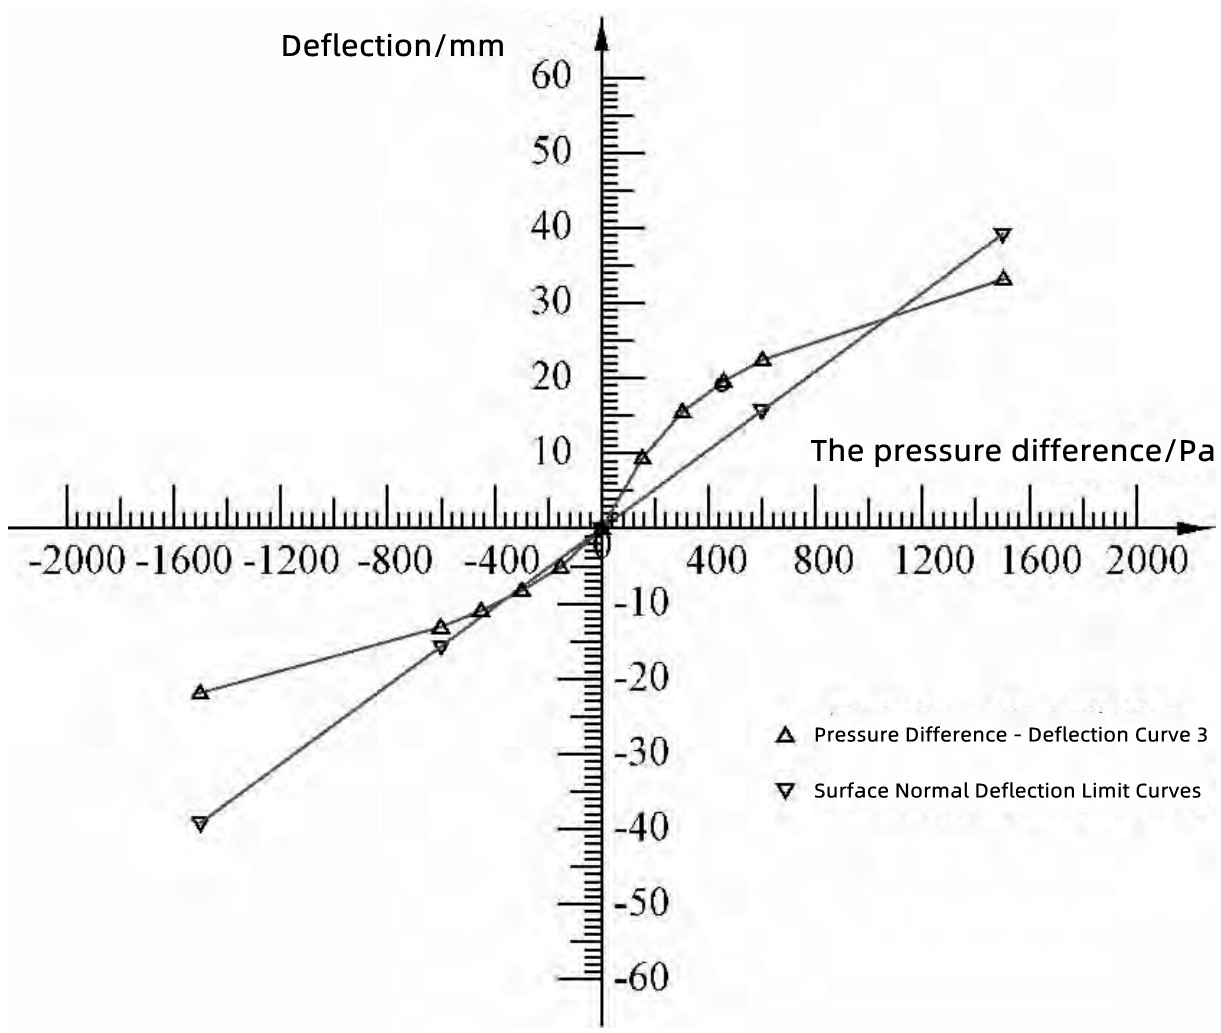 Figure 3 Comparison of the measured deflection with the deflection limit specified in the standard 